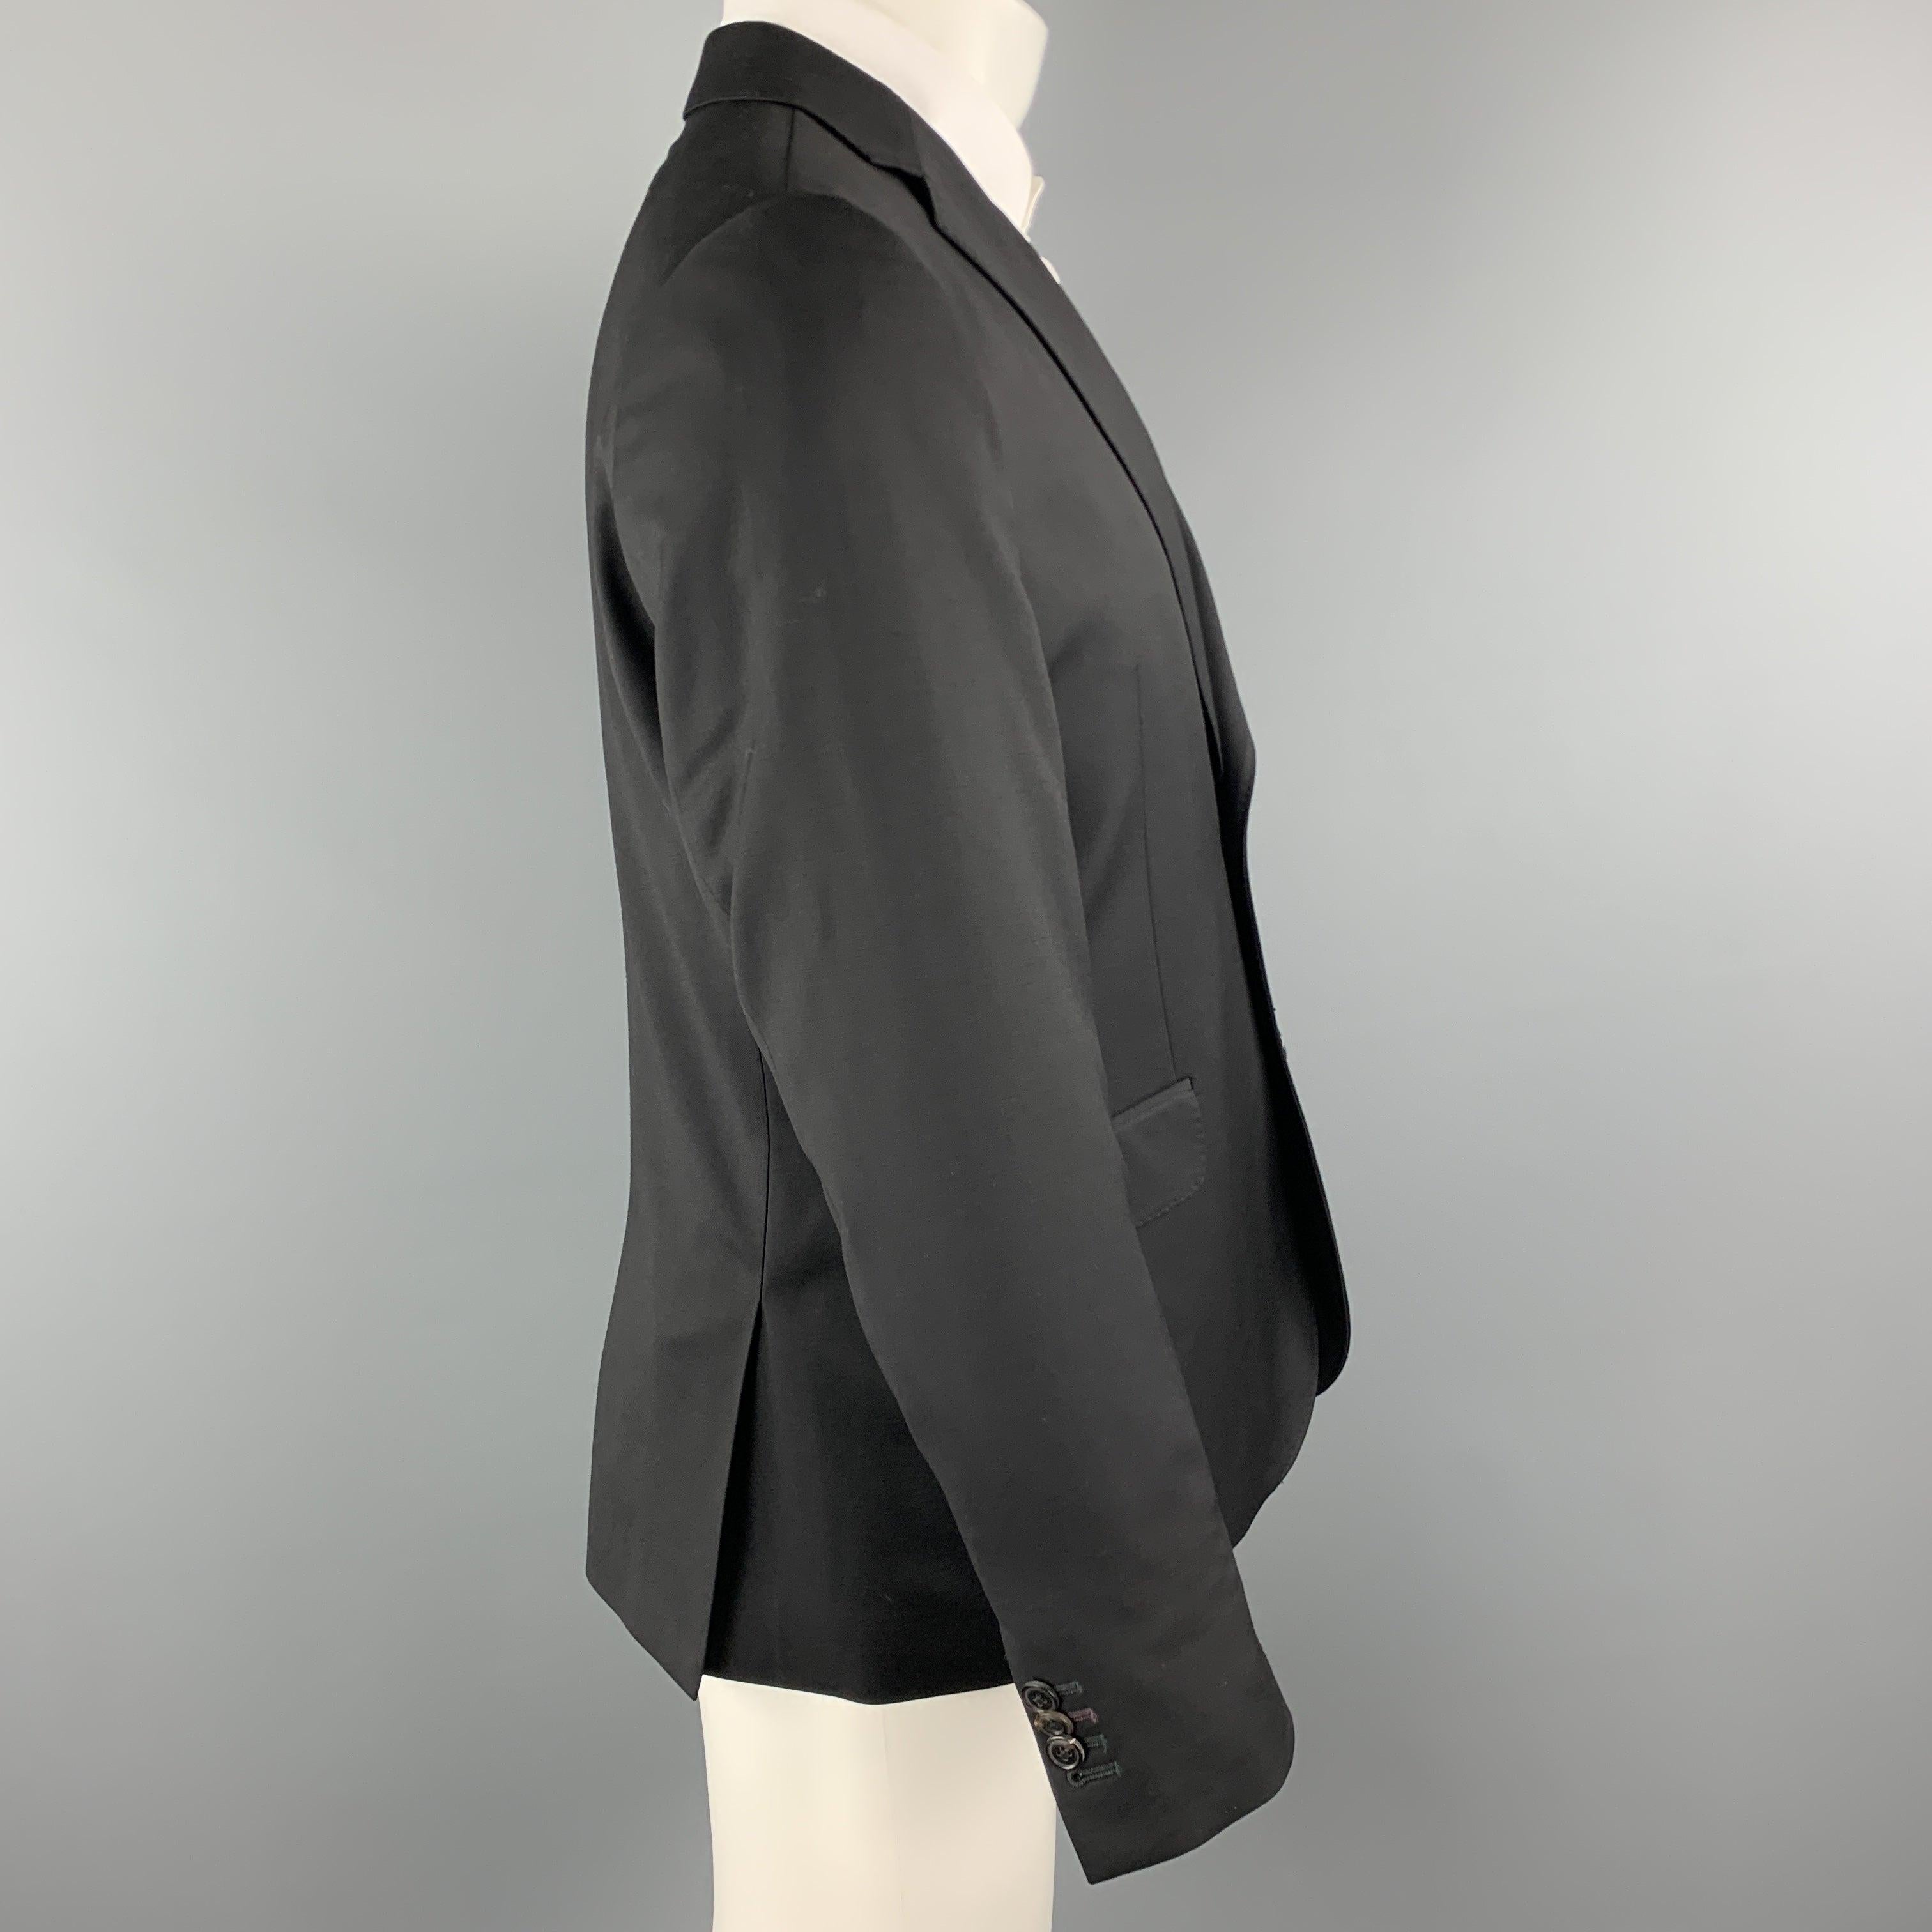 PAUL SMITH Size 42 Short Solid Black Wool Notch Lapel Sport Coat In Excellent Condition For Sale In San Francisco, CA